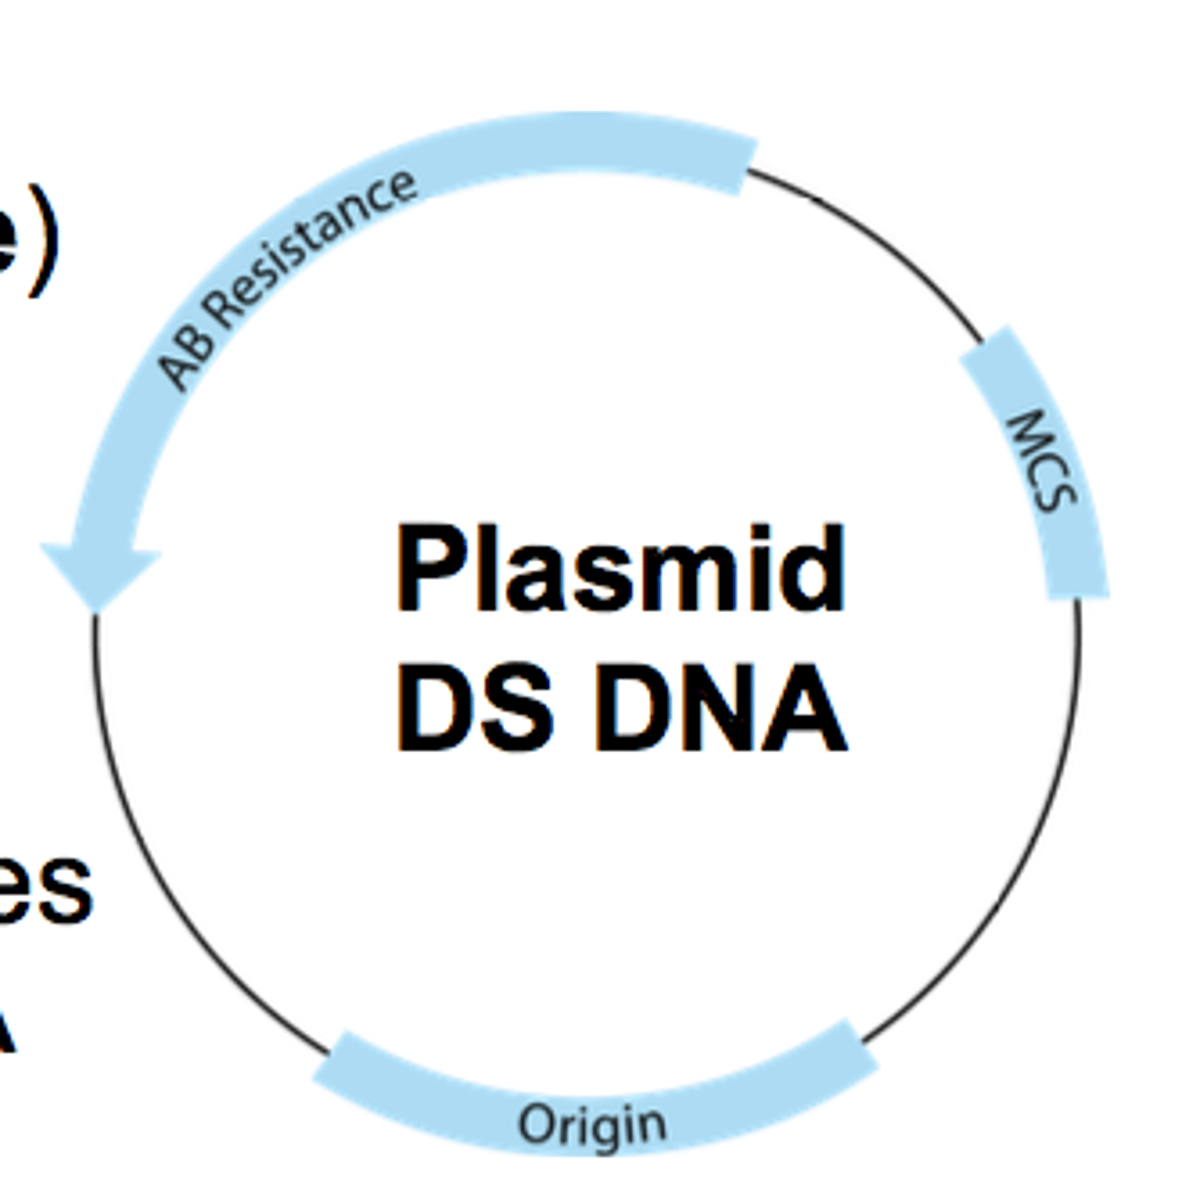 <p>allows plasmid to replicate independently form the bacterial chromosome</p>